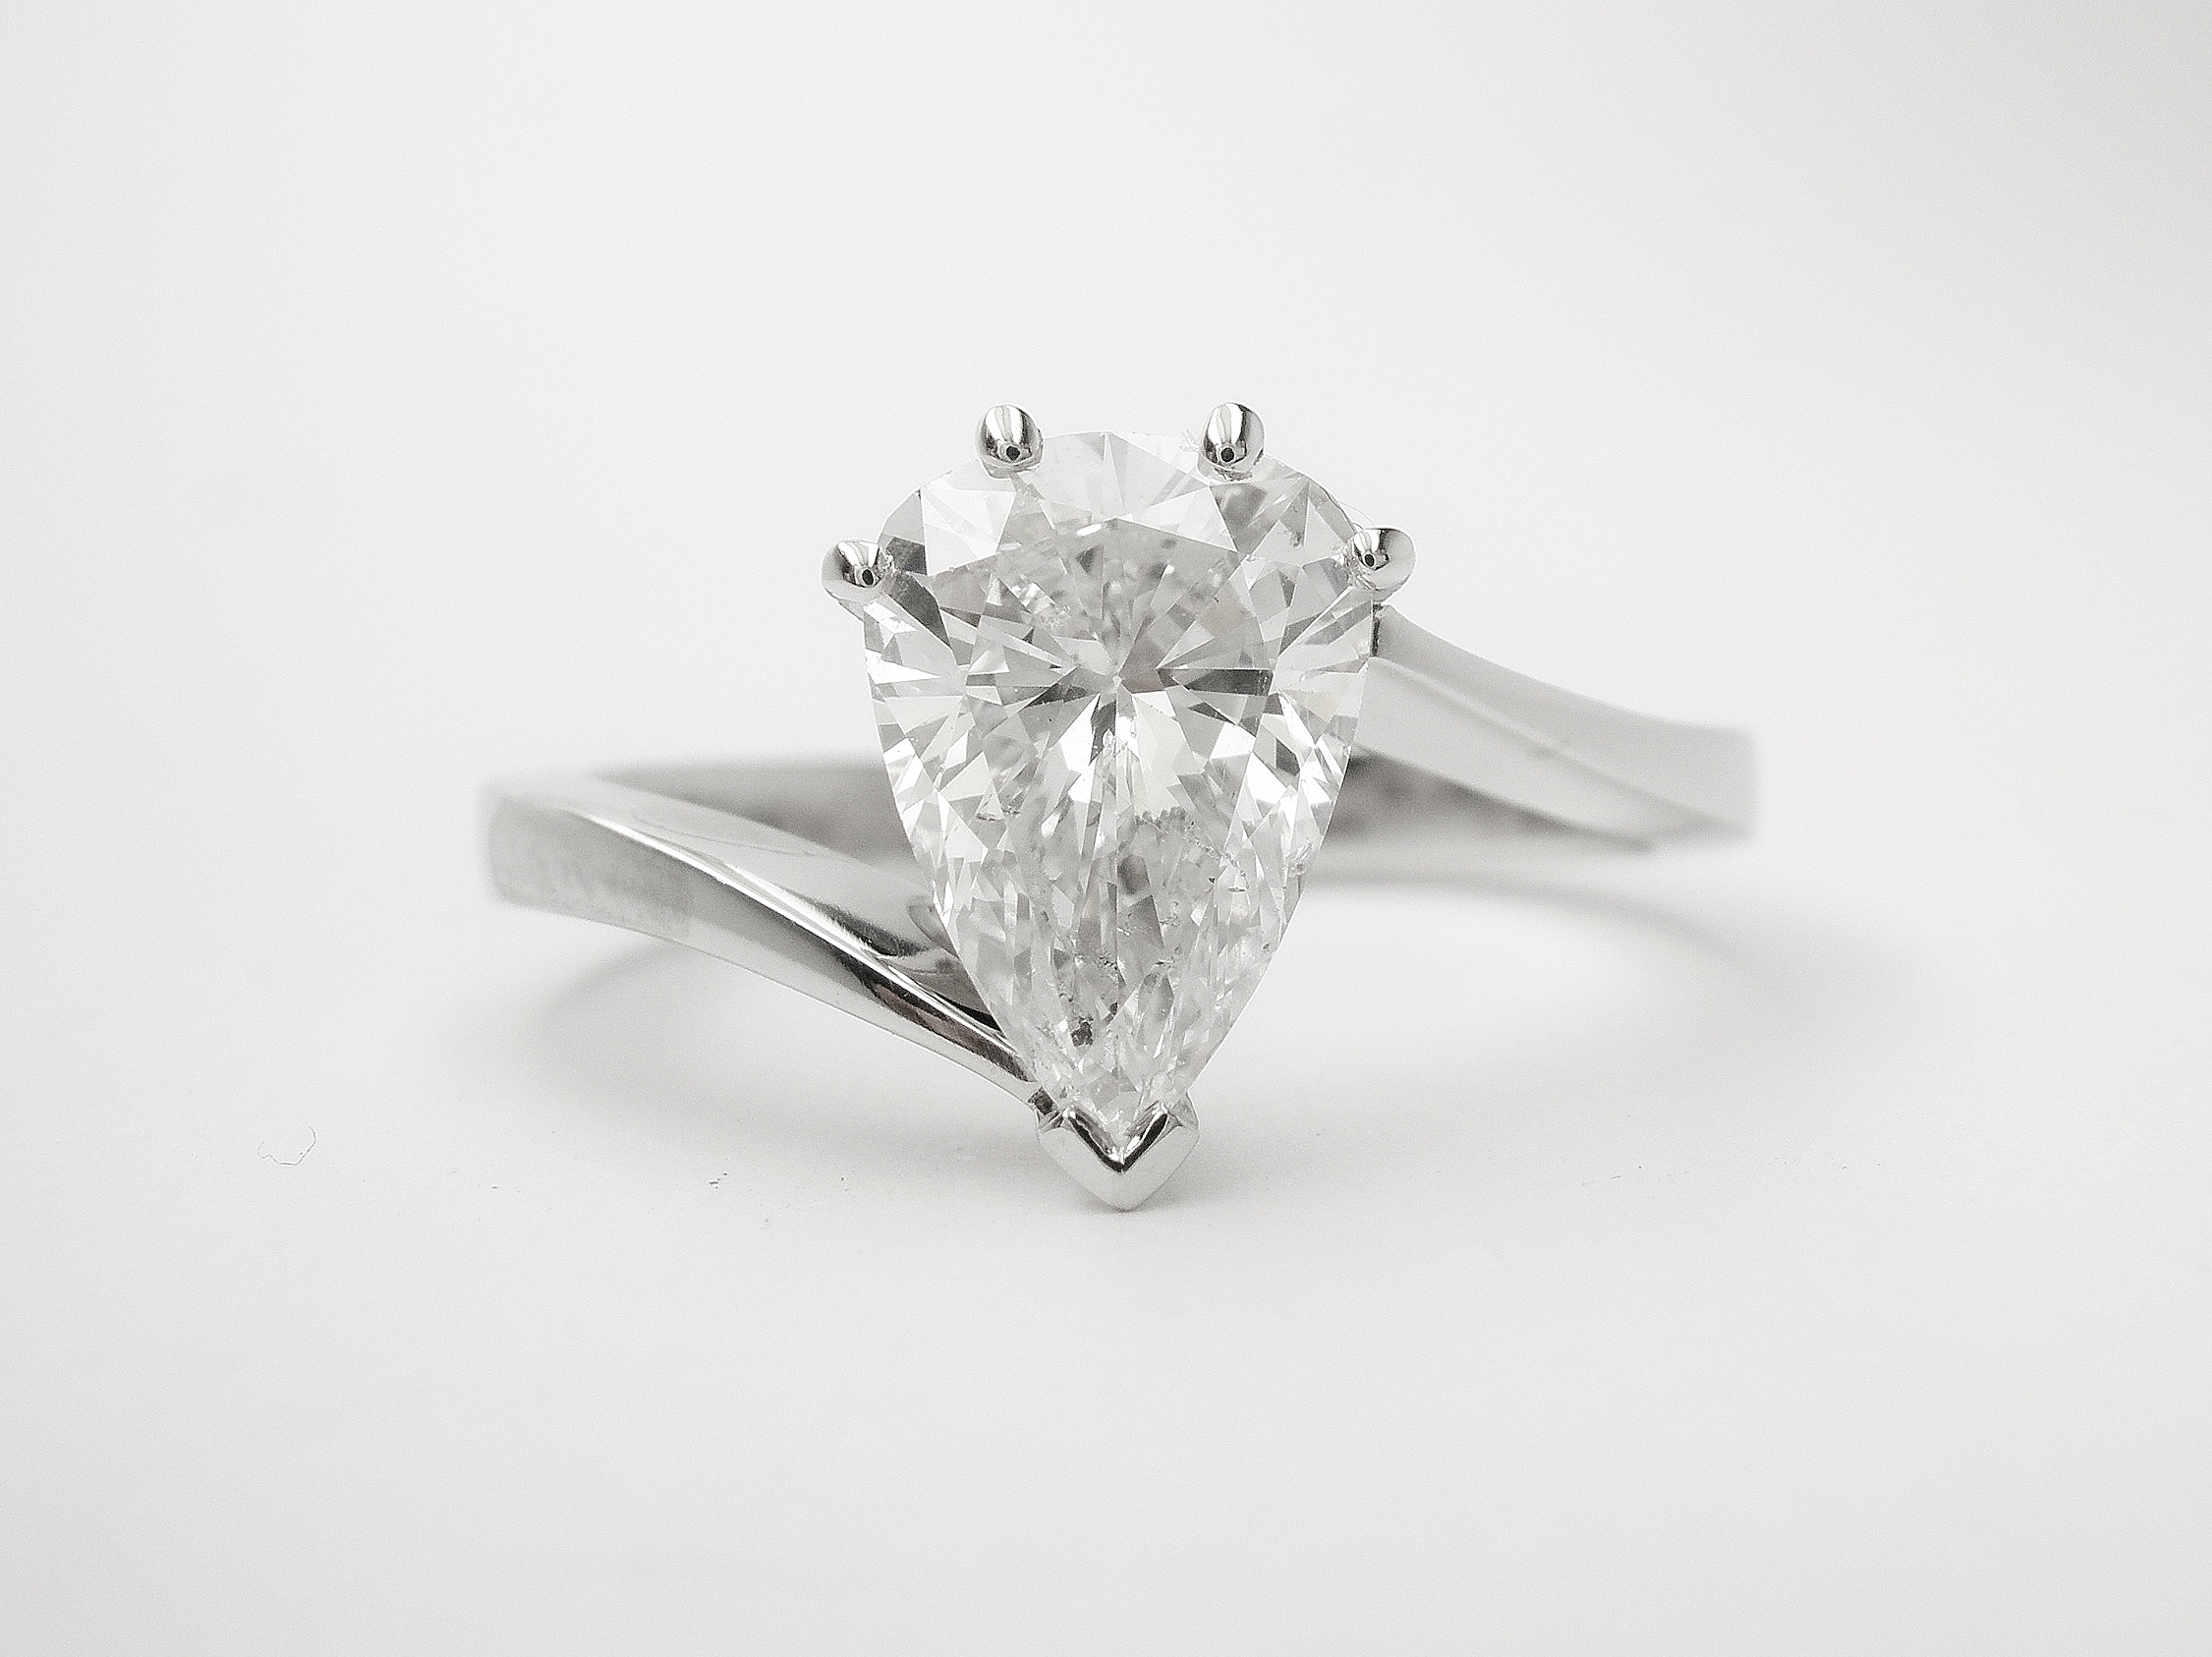 Pear shaped diamond of 1.10cts. mounted in a platinum cross-over ring mount.